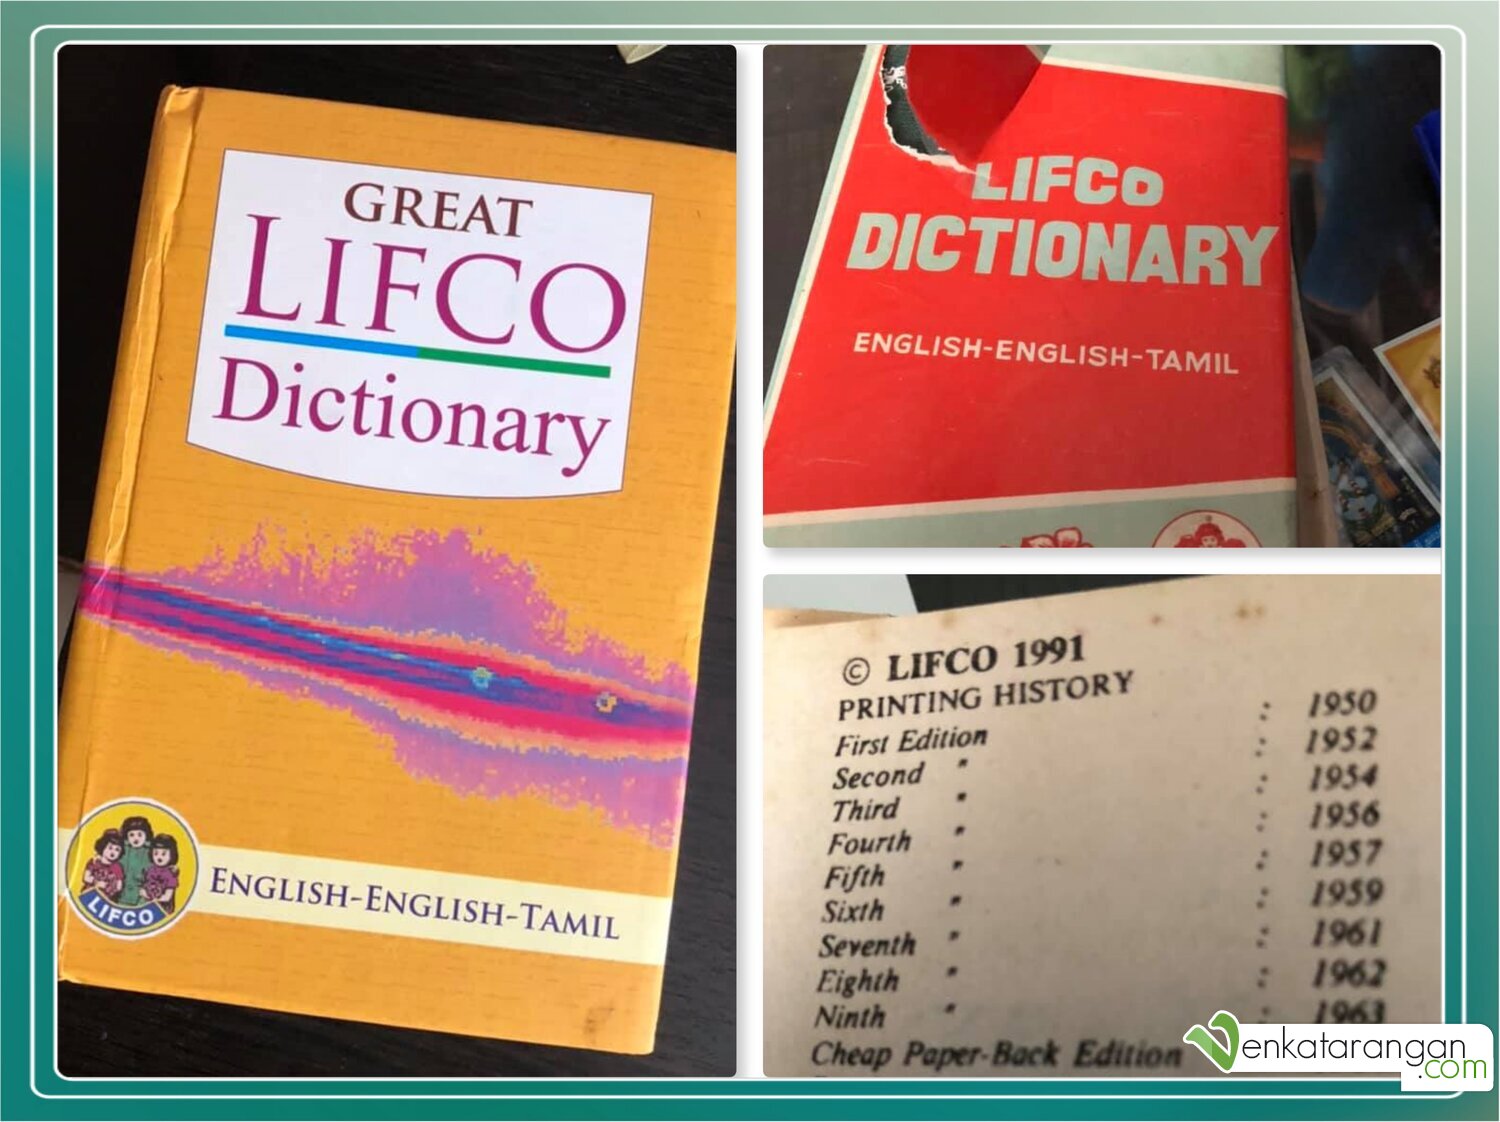 (left to right) New Great LIFCO Dictionary and 30-year-old Little LIFCO Dictionary (LLD) - English-English-Tamil 